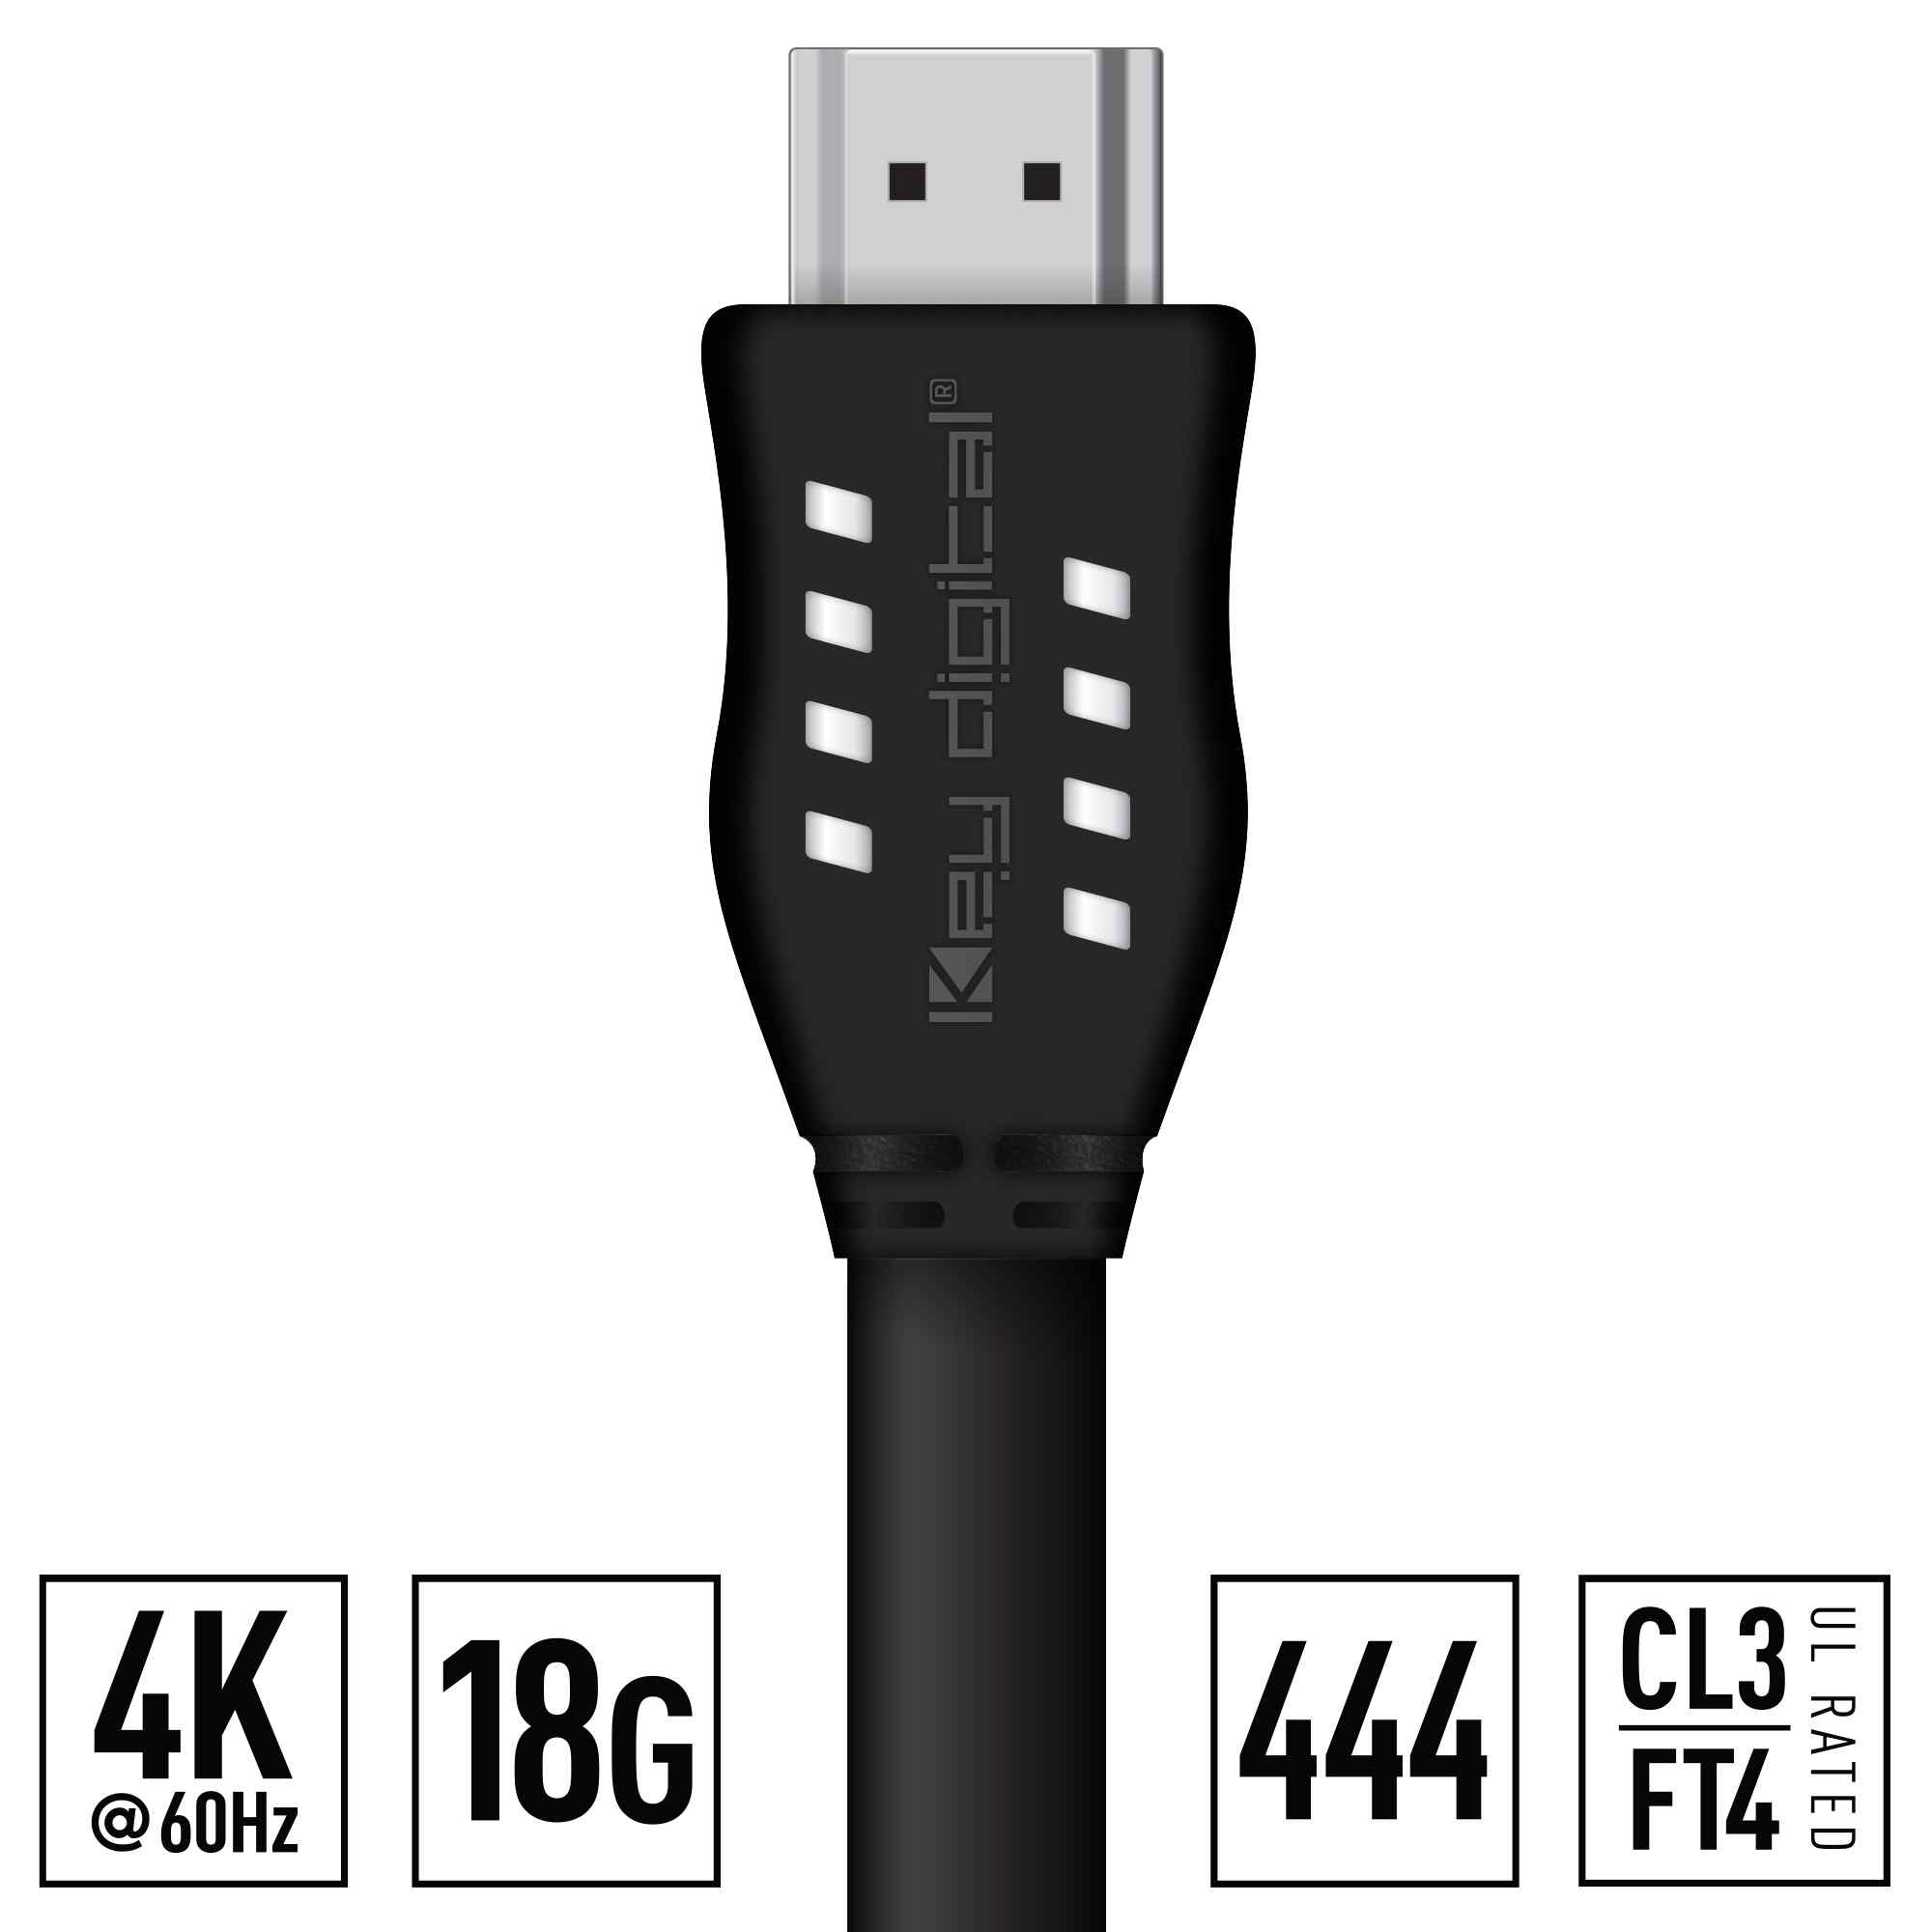 Key Digital 4k certified HDMI cable front view 